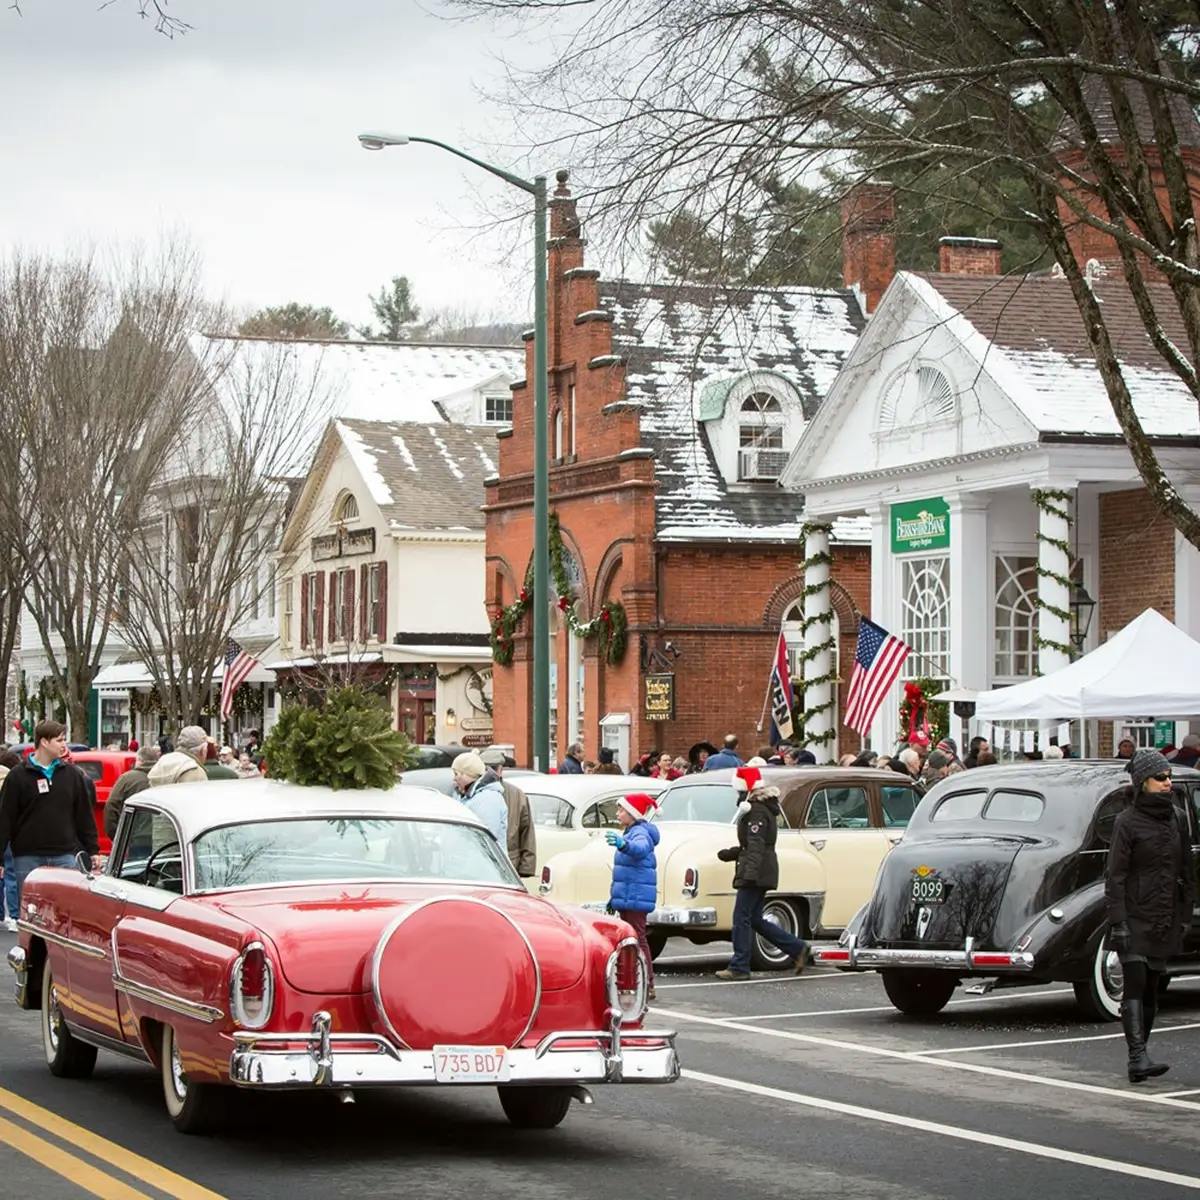 Vintage cars parked on a snowy street in Stockbridge, MA, as they prepare to create the famous Norman Rockwell painting.